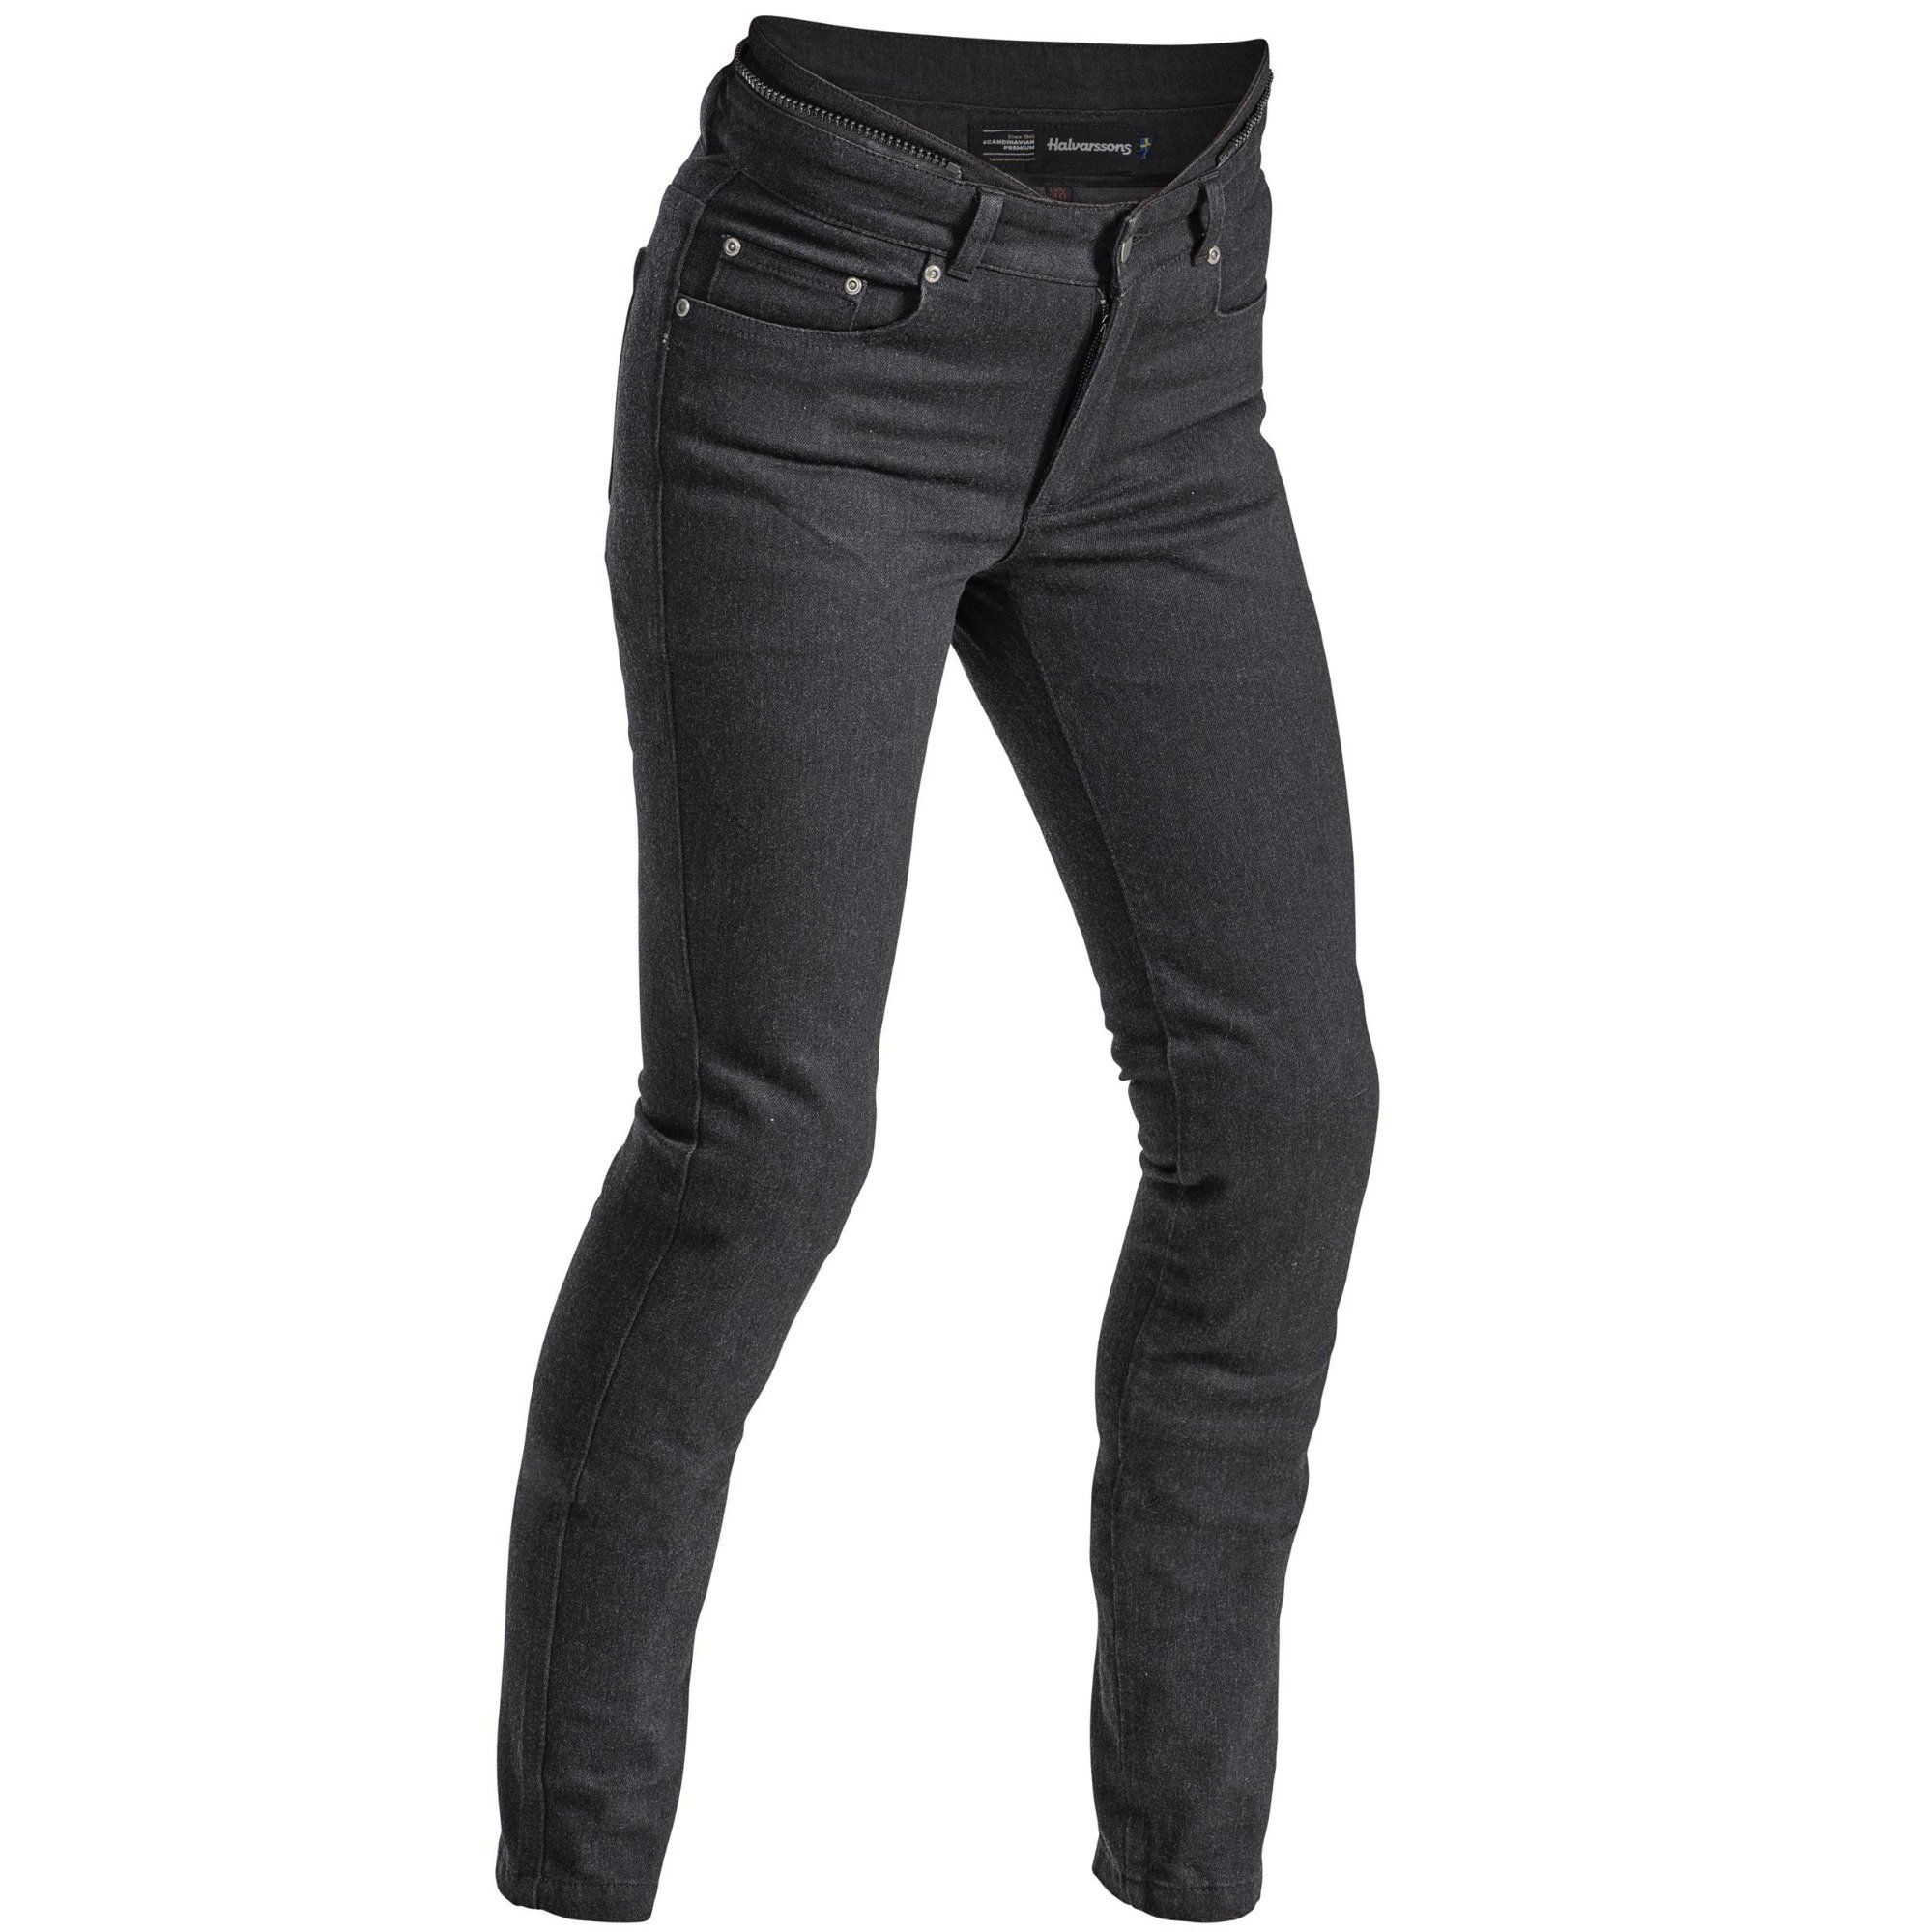 Image of Halvarssons Jeans Nyberg Woman Black Size 42 ID 6438235239317